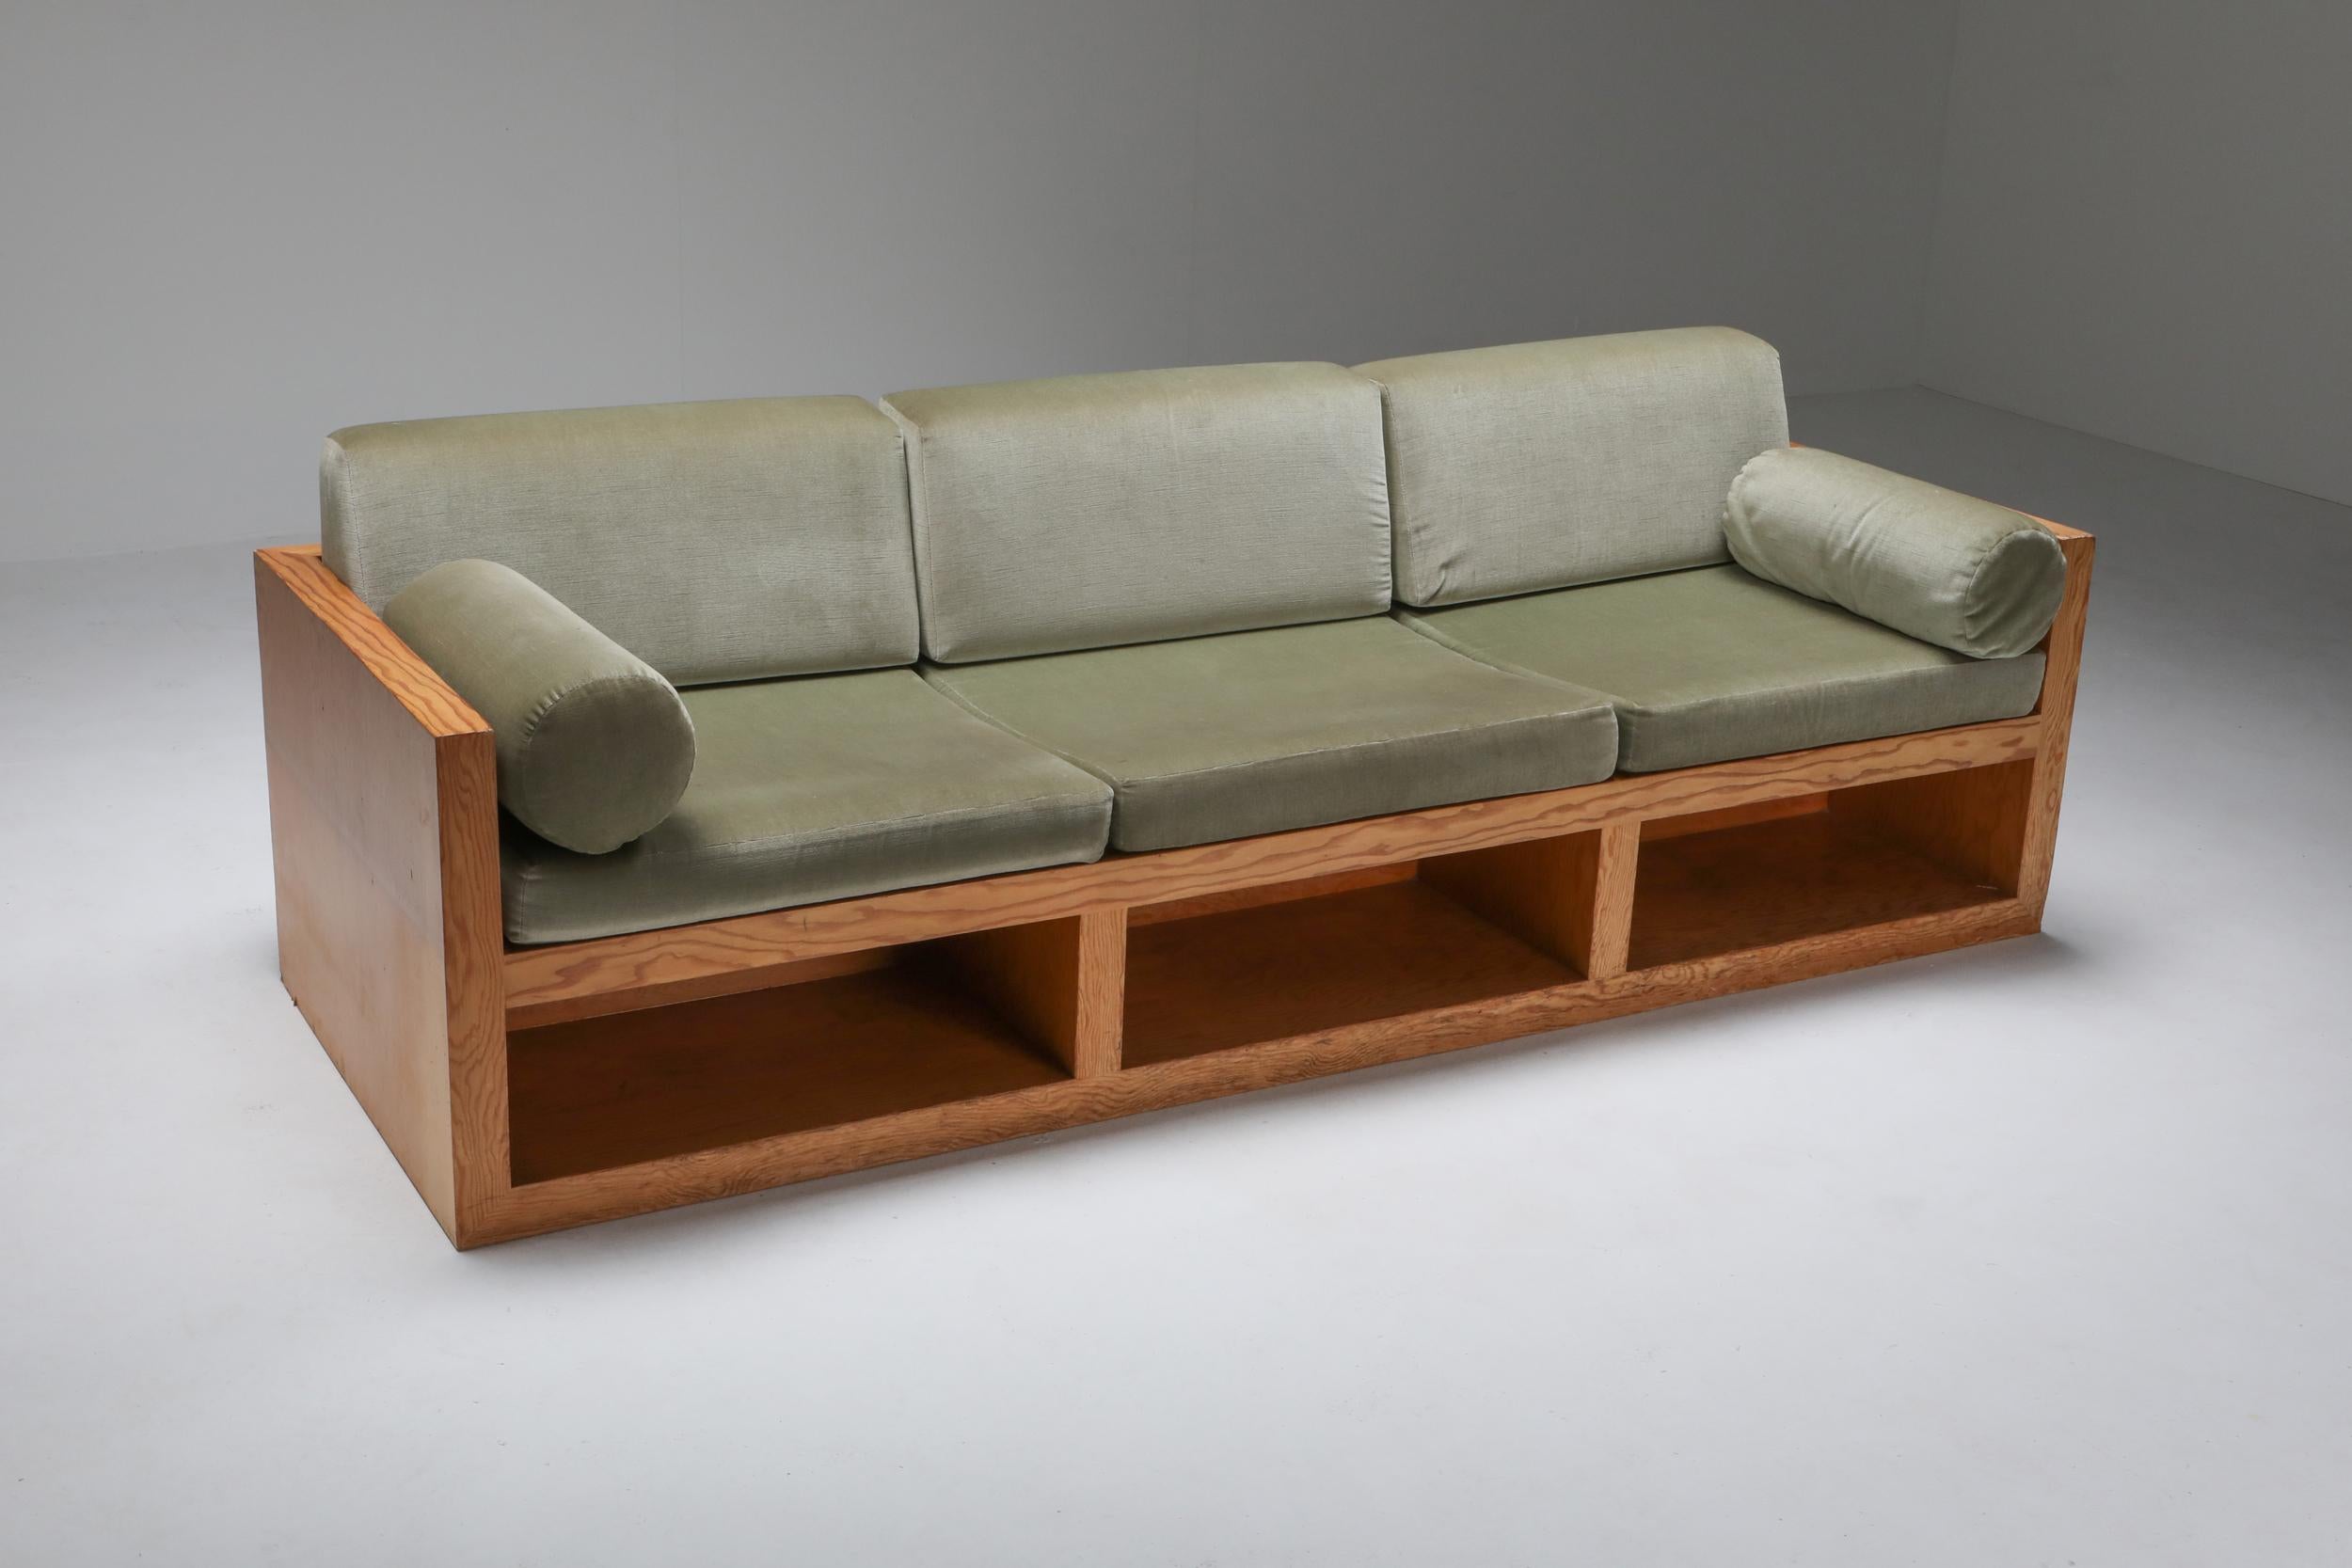 Dutch modernist three-seat couch by an architect from the 1960s
Minimalist and modernist design which incorporates great functionality.
The set holds a very contemporary look through the use of pitch pine and velvet.
The fabric and foam are still